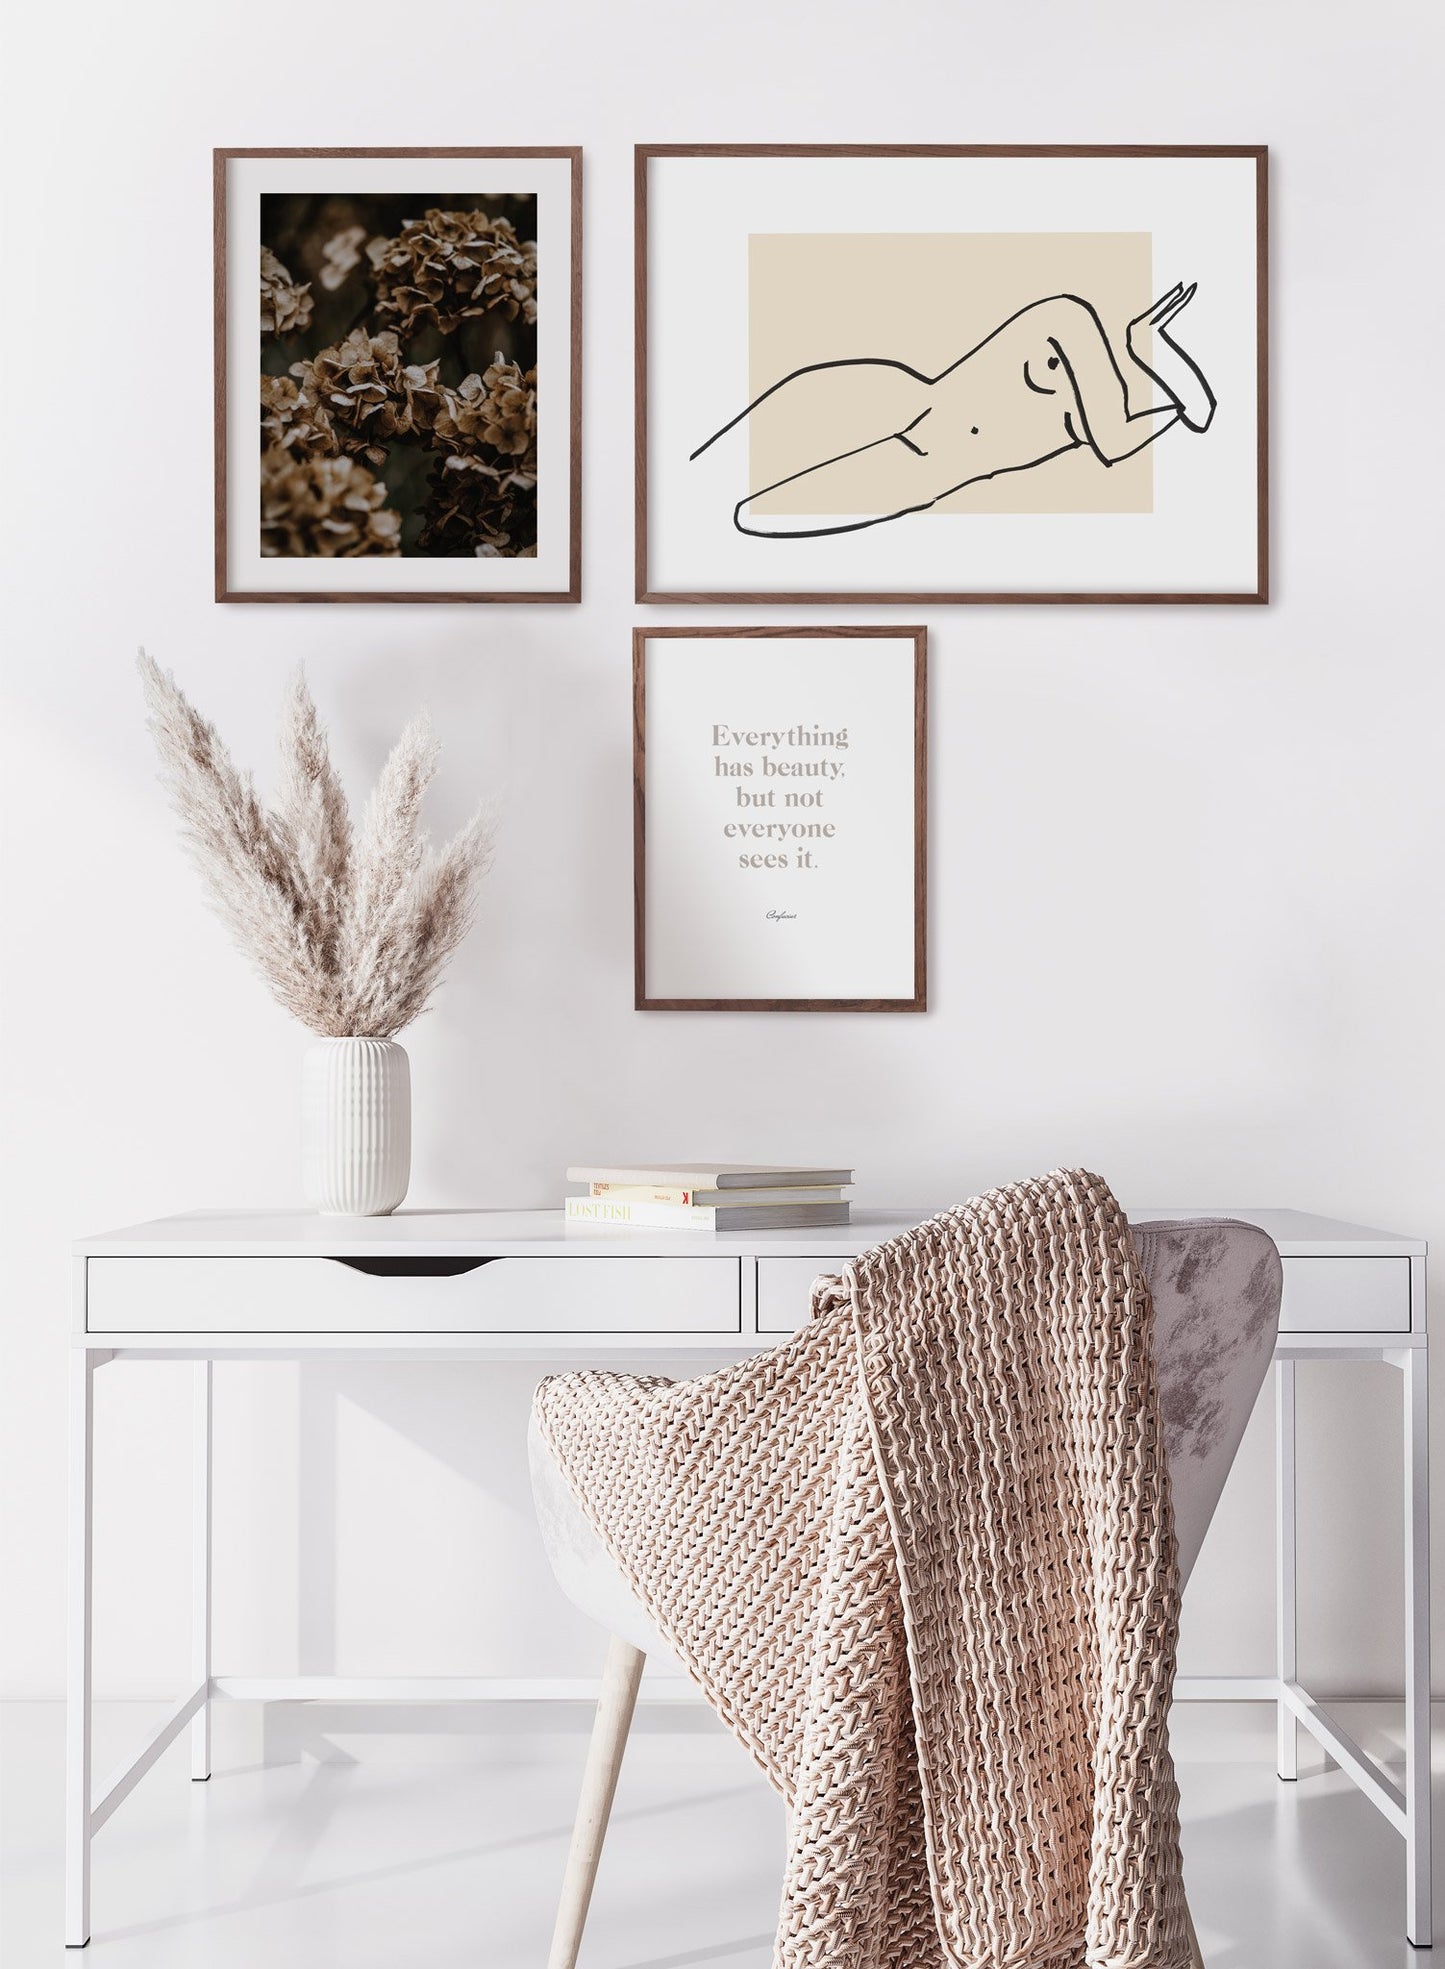 "Irresistible" is a minimalist beige and white illustration poster by Opposite Wall of a line art female nude lying down, superimposed over a beige square.